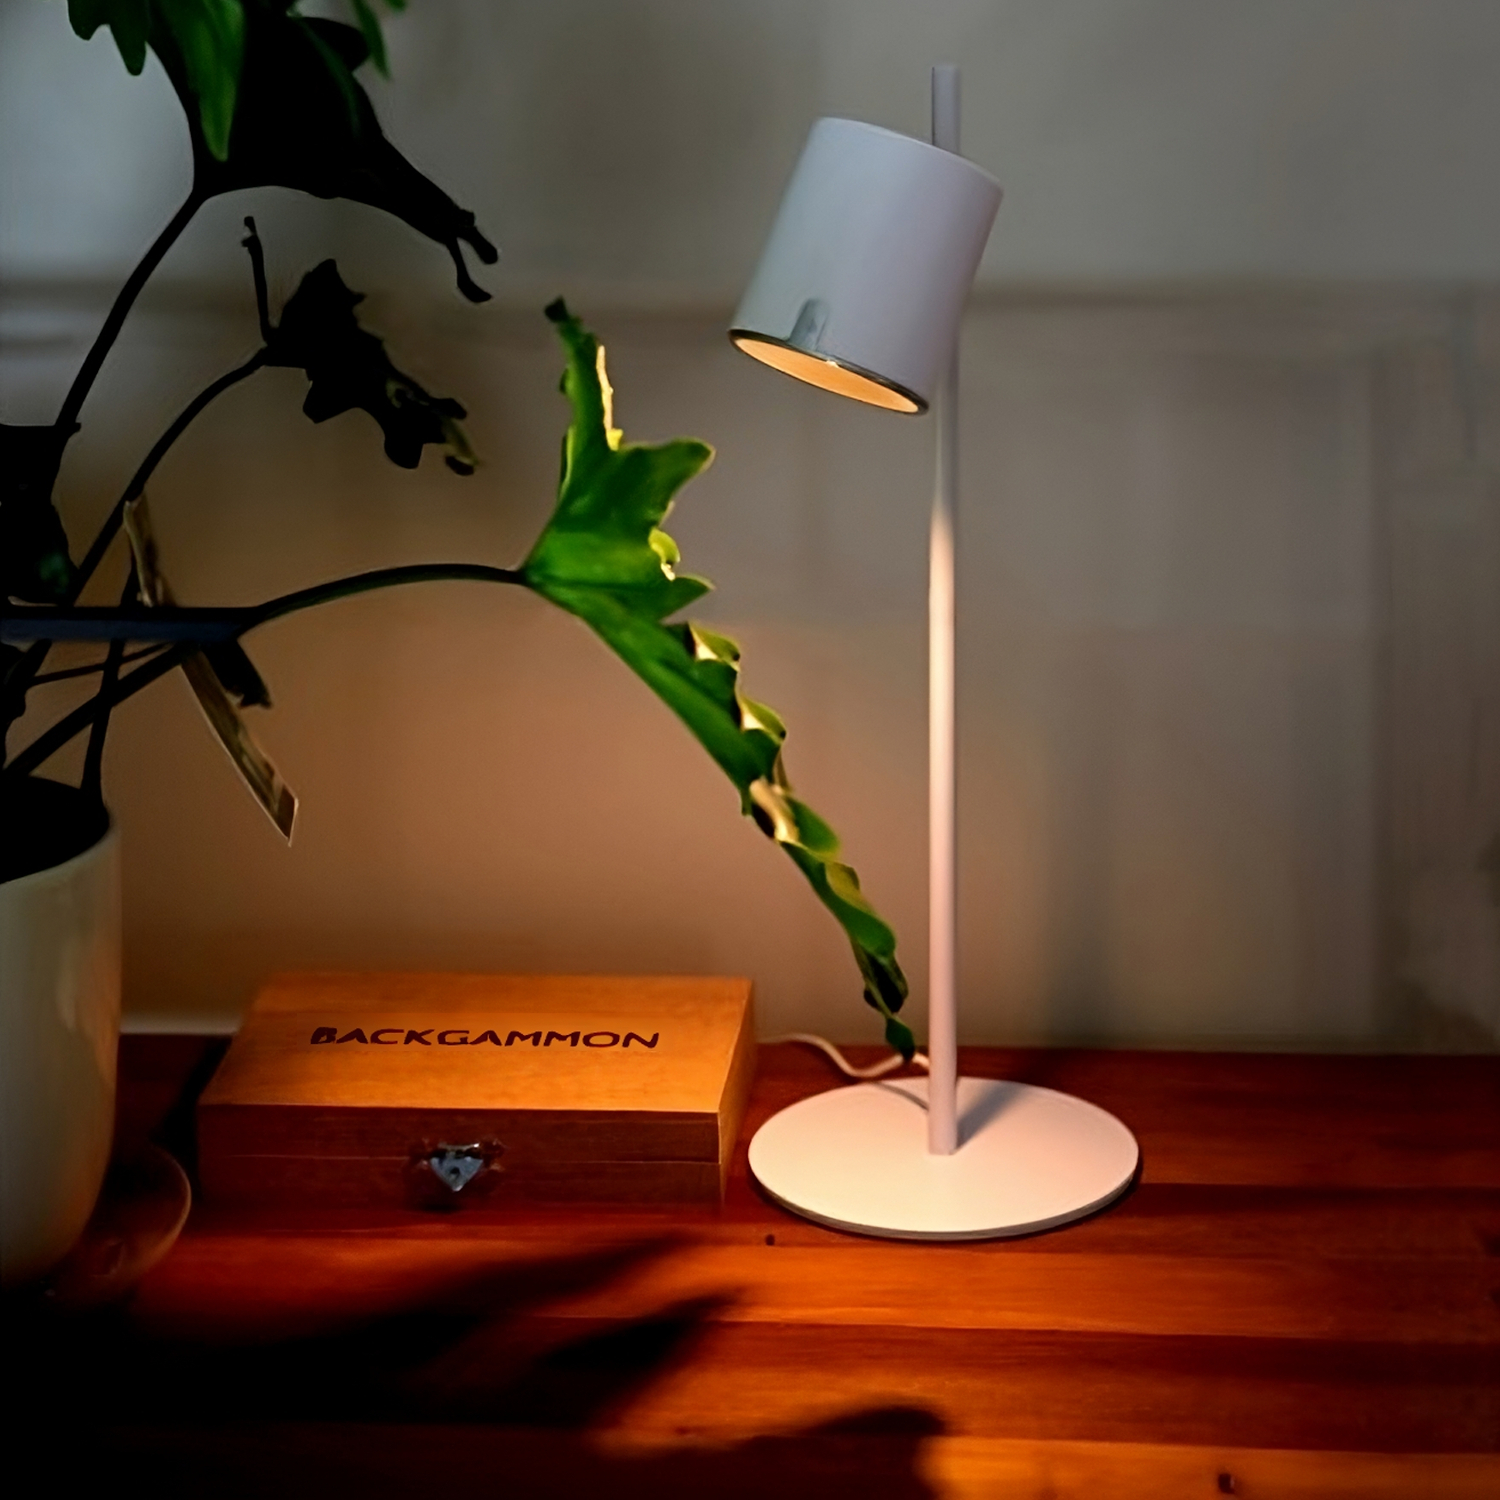 Product image of Arlo White Table lamp on a wooden desk, the light is on illuminating the desk